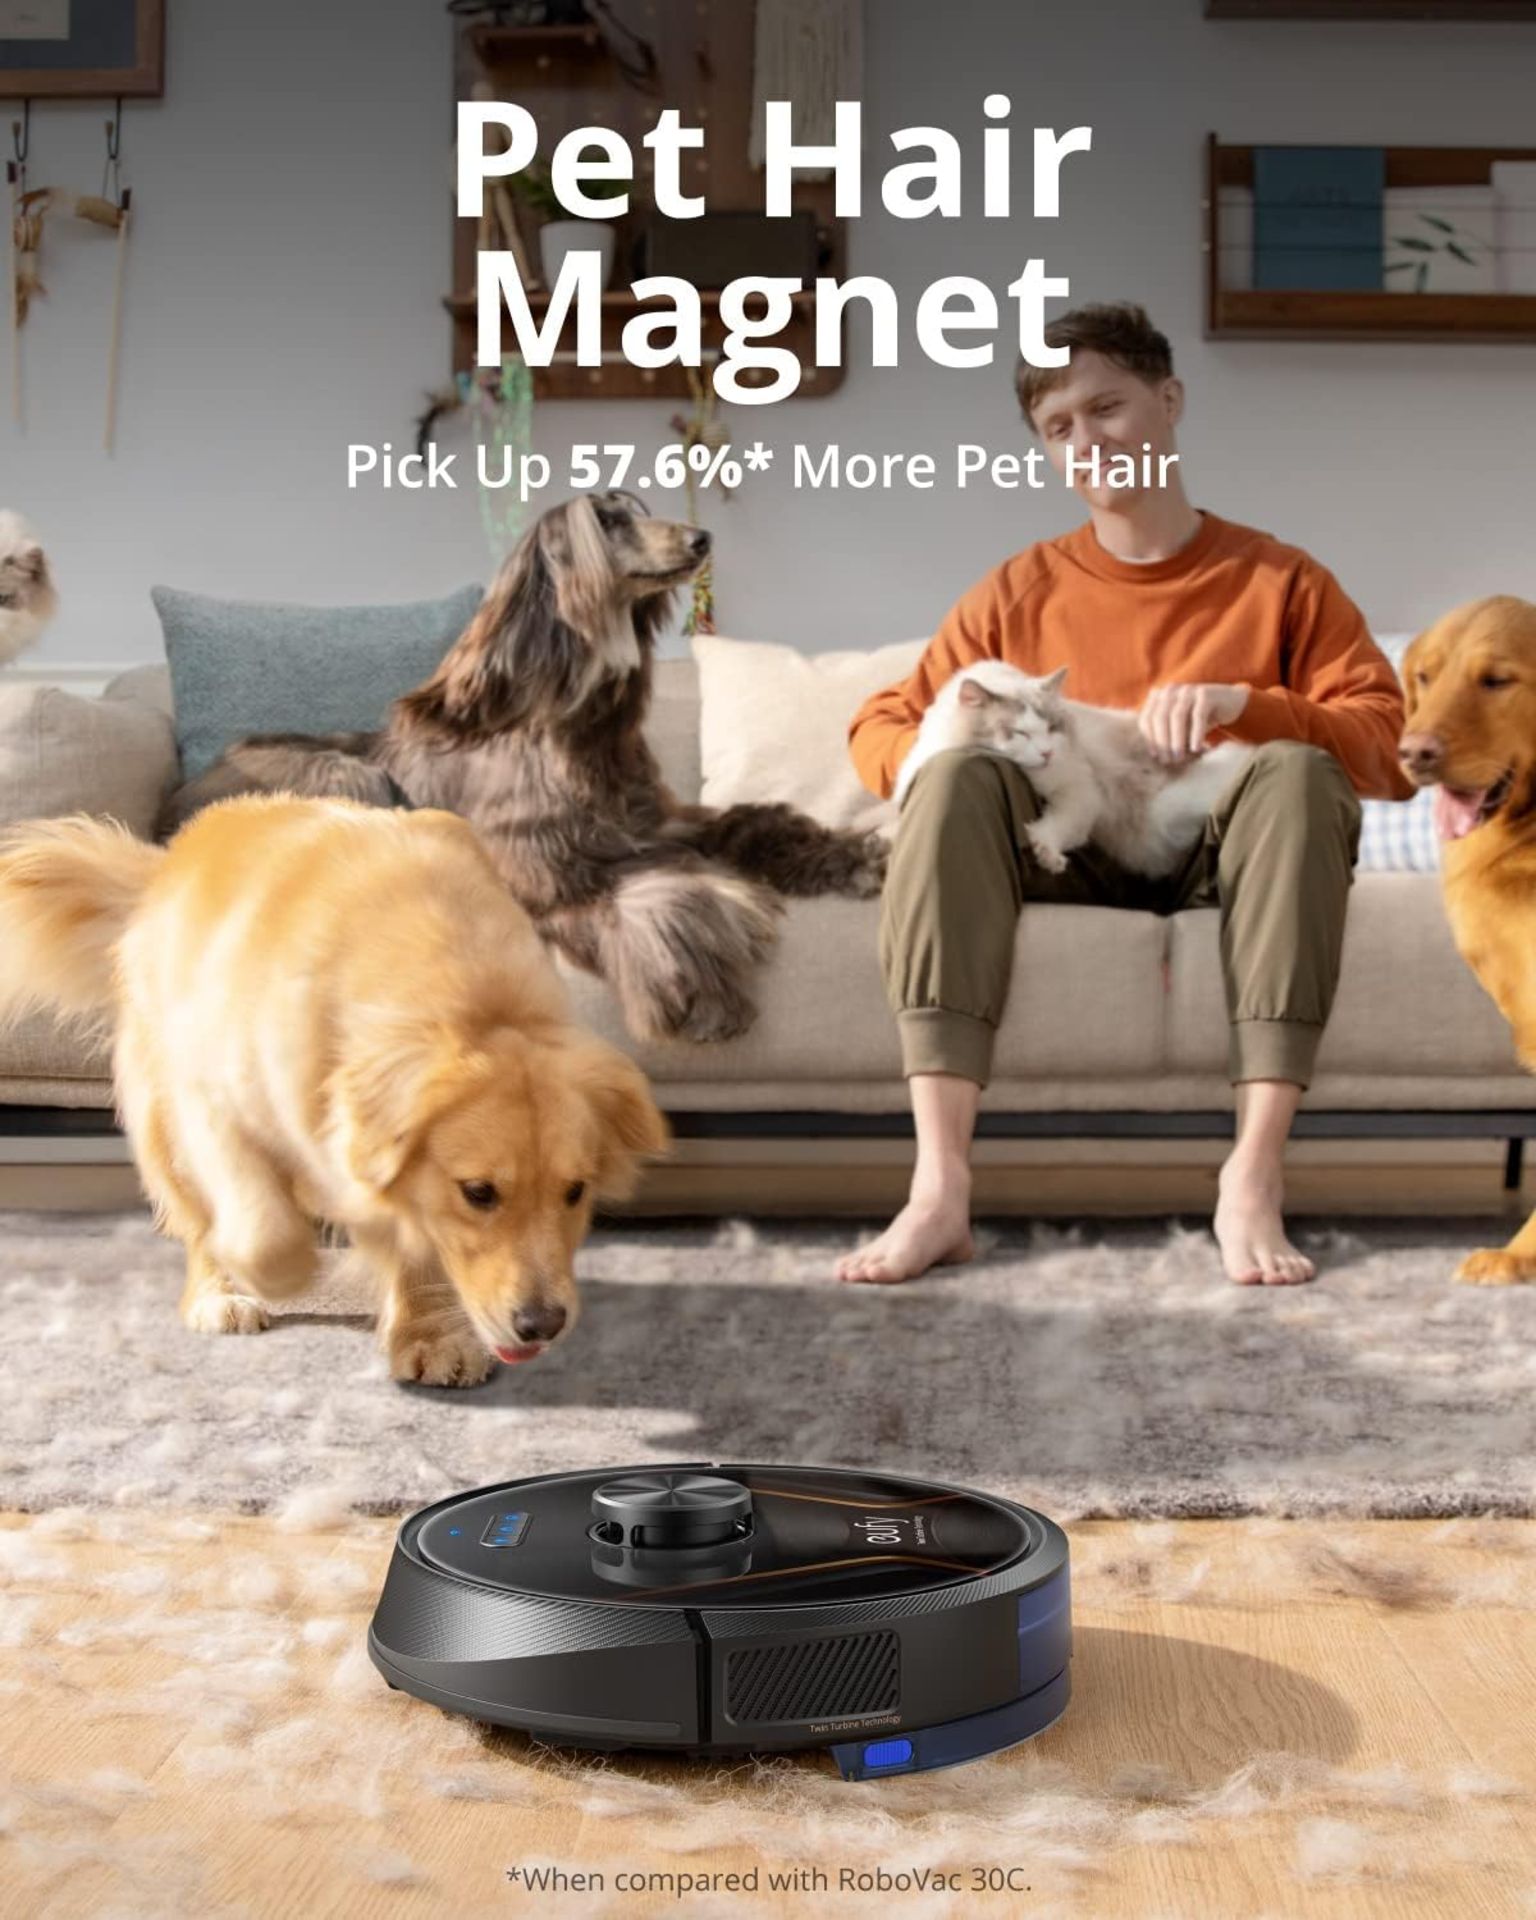 EUFY Robovac X8 Dual Twin-Tower Robot Vacuum Cleaner with iPath Laser Navigation. RRP £349.99. - Image 4 of 7